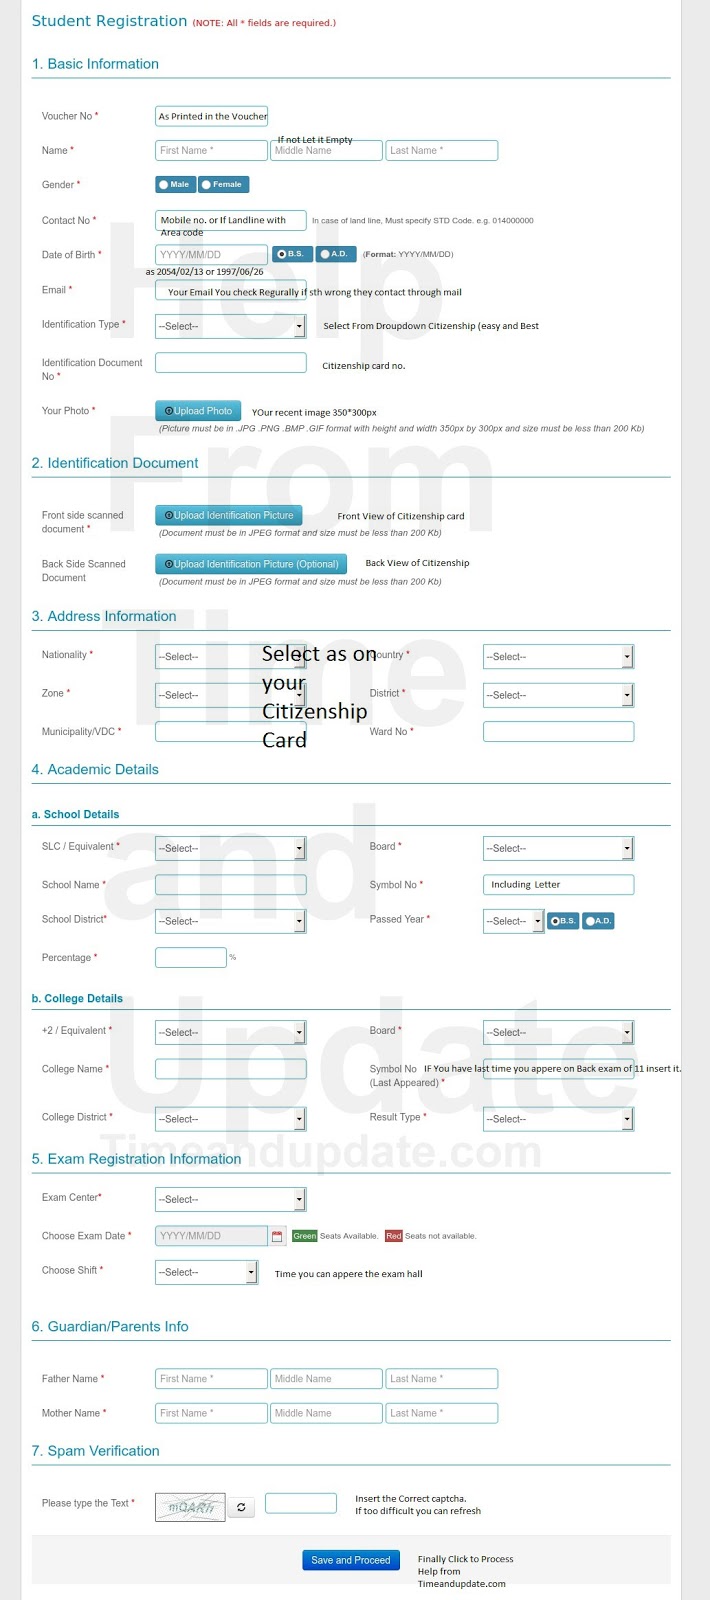 How to fill up IOE entrance application form -- IOE Entrance Application form